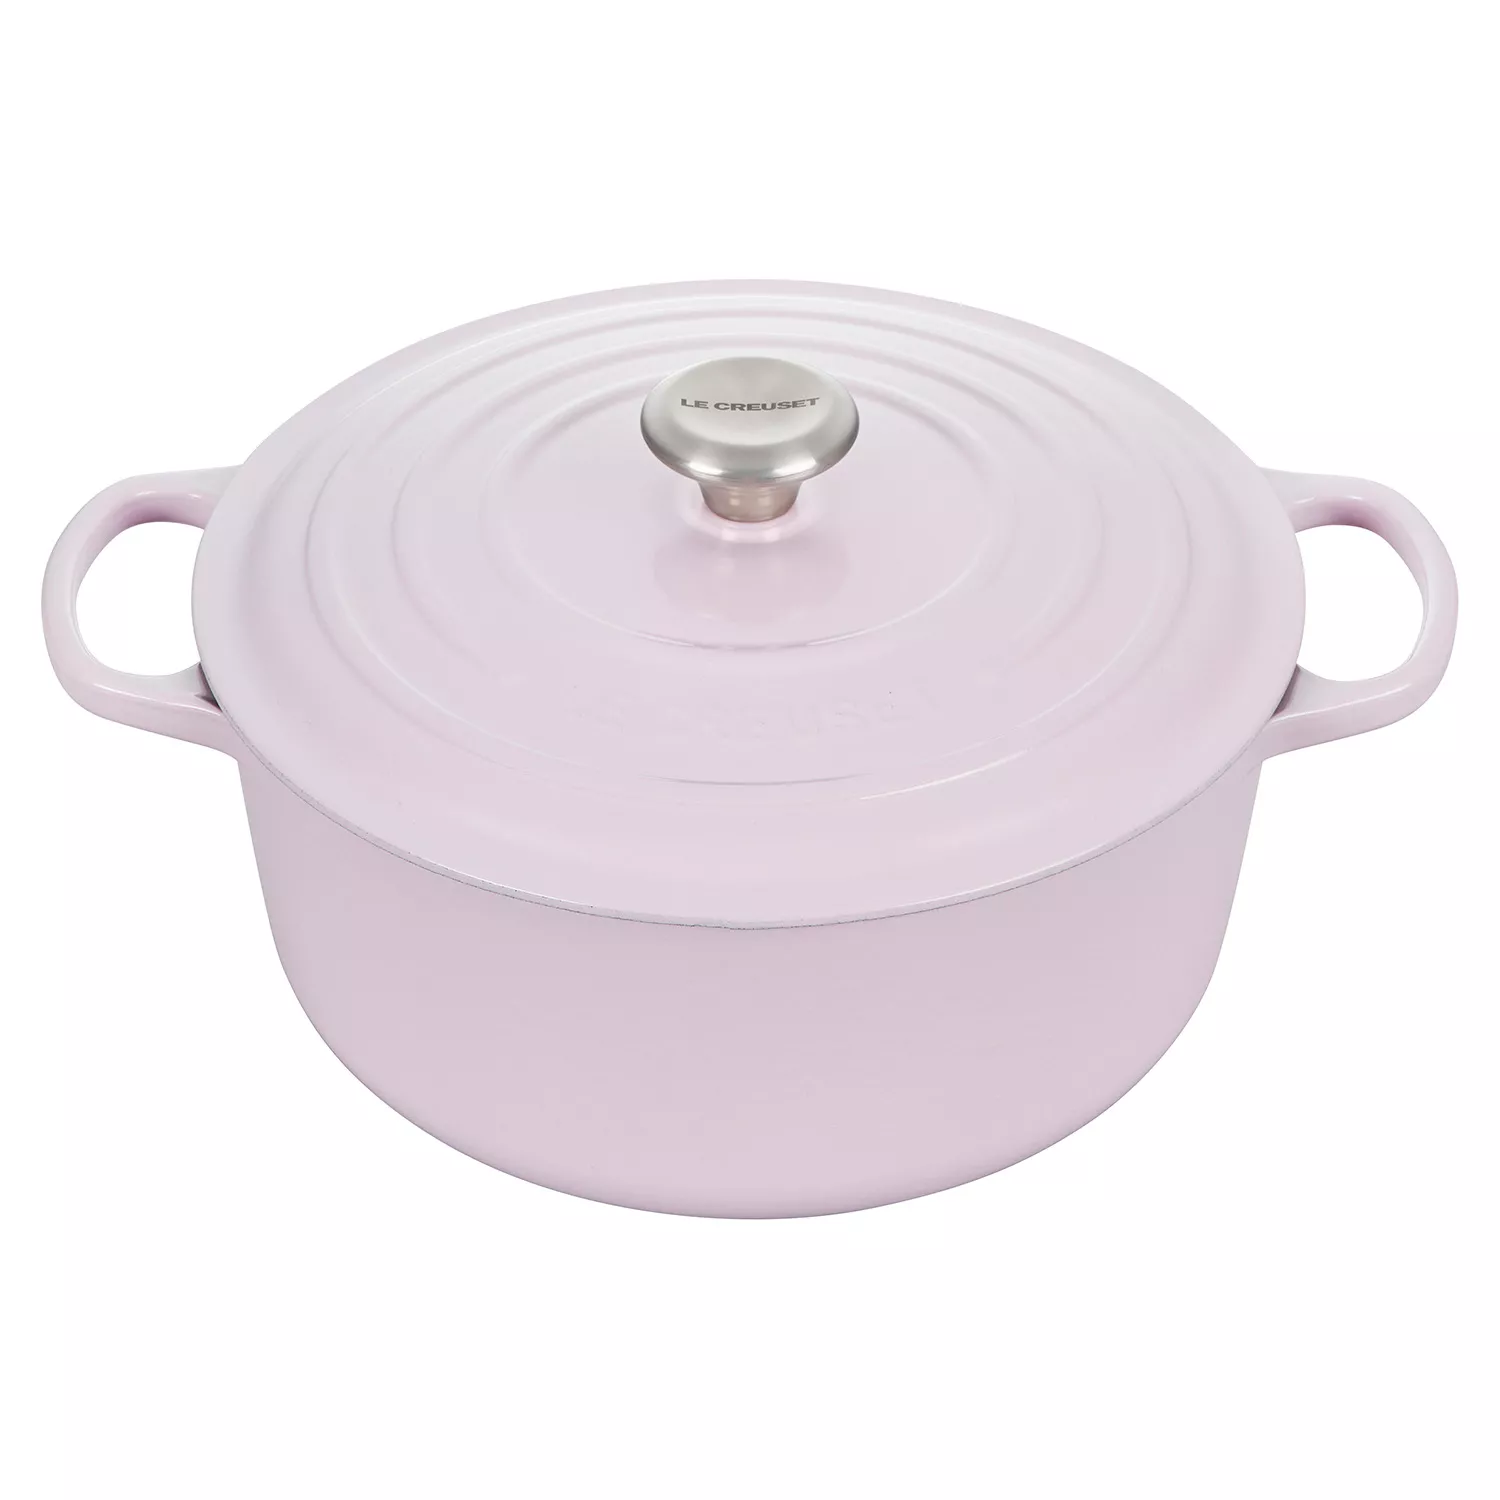 SUGAR PINK! LE CREUSET 3.5 QT SIGNATURE OVAL DUTCH OVEN MADE in FRANCE! S937